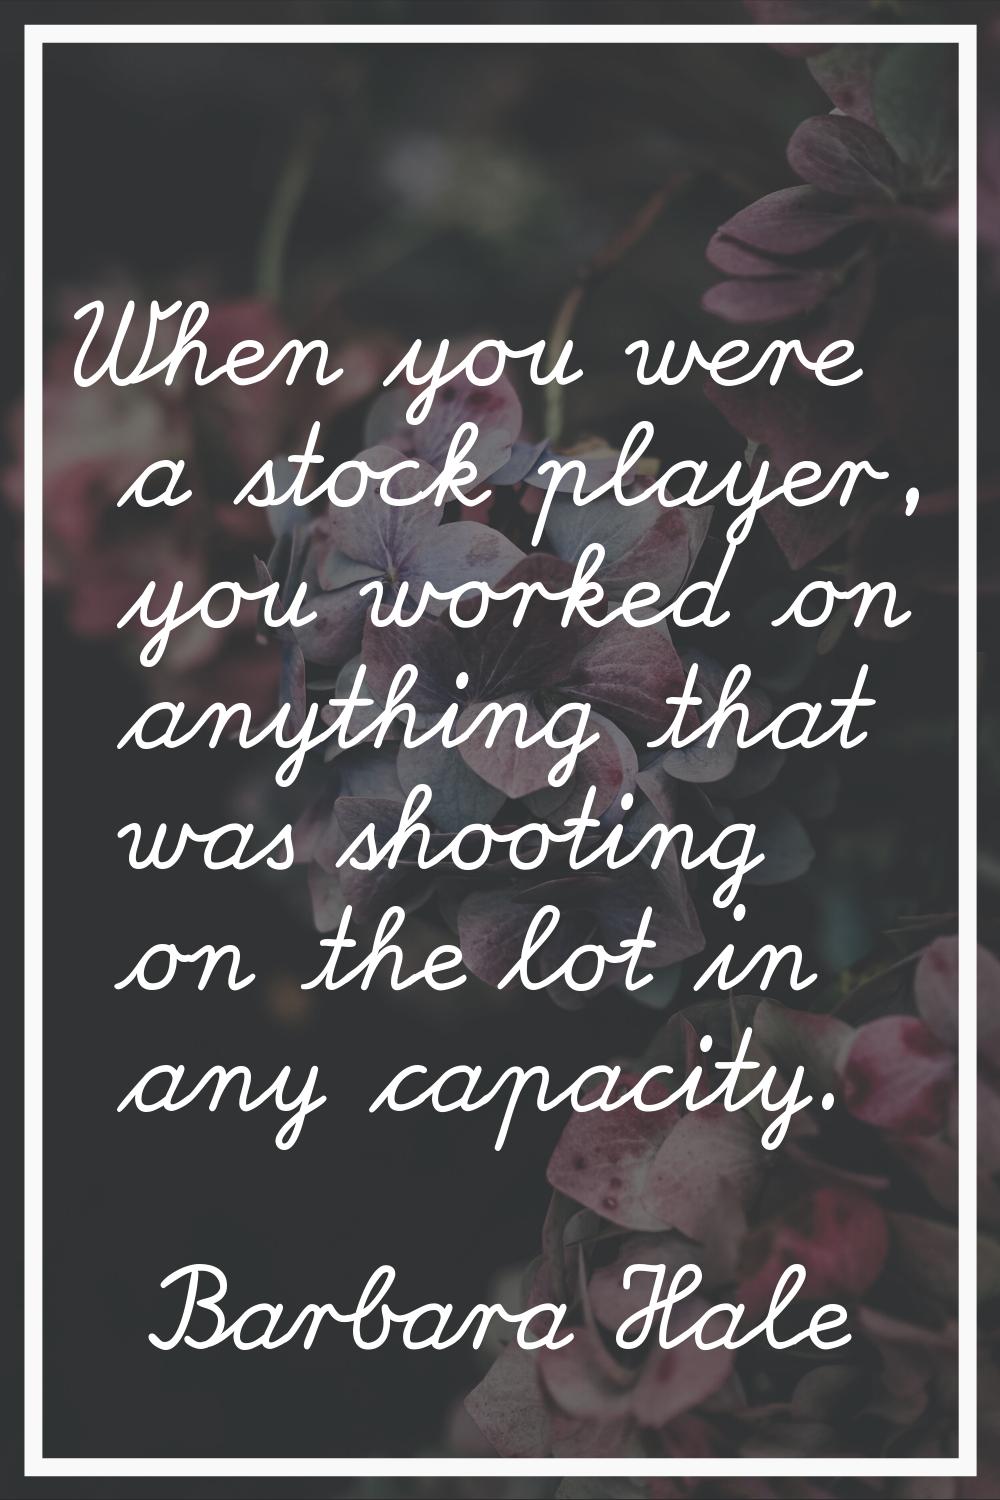 When you were a stock player, you worked on anything that was shooting on the lot in any capacity.